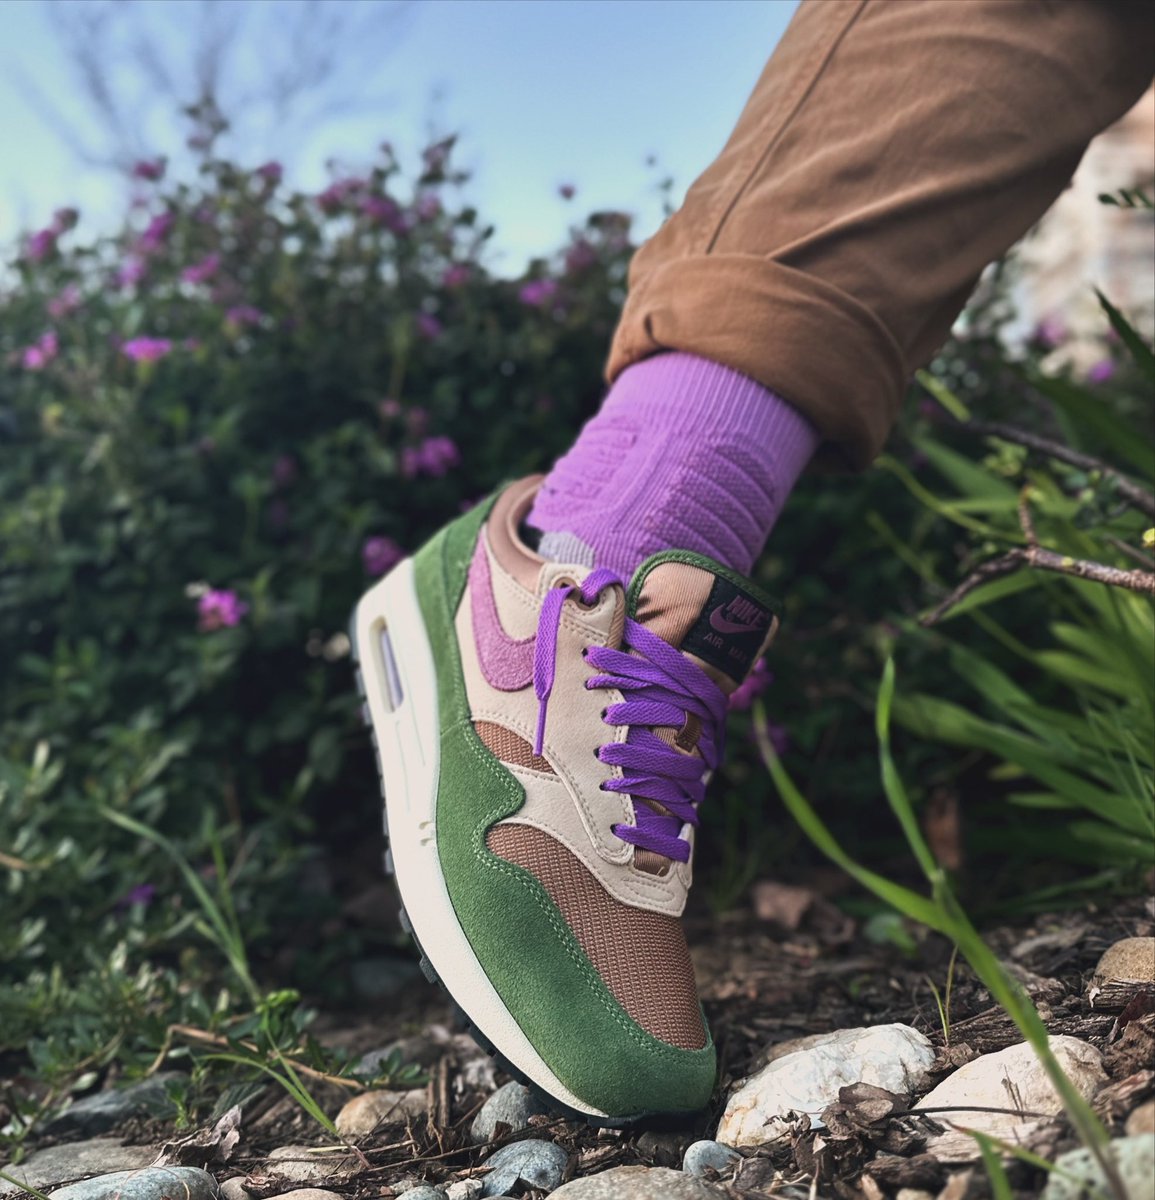 Day 15 of #marchmaxness for #airmaxmonth spring vibes with the Treeline Air Max 1s #sneakerfreaker #thesolefirm #stilllaceddifferently #snkrskliveheatingup
#solecollectors #snkrskickcheck #sneakerhead #sneakerfreakerfam #instakicks #MillerApproved #dubbsteppin #snkrliveheatingup